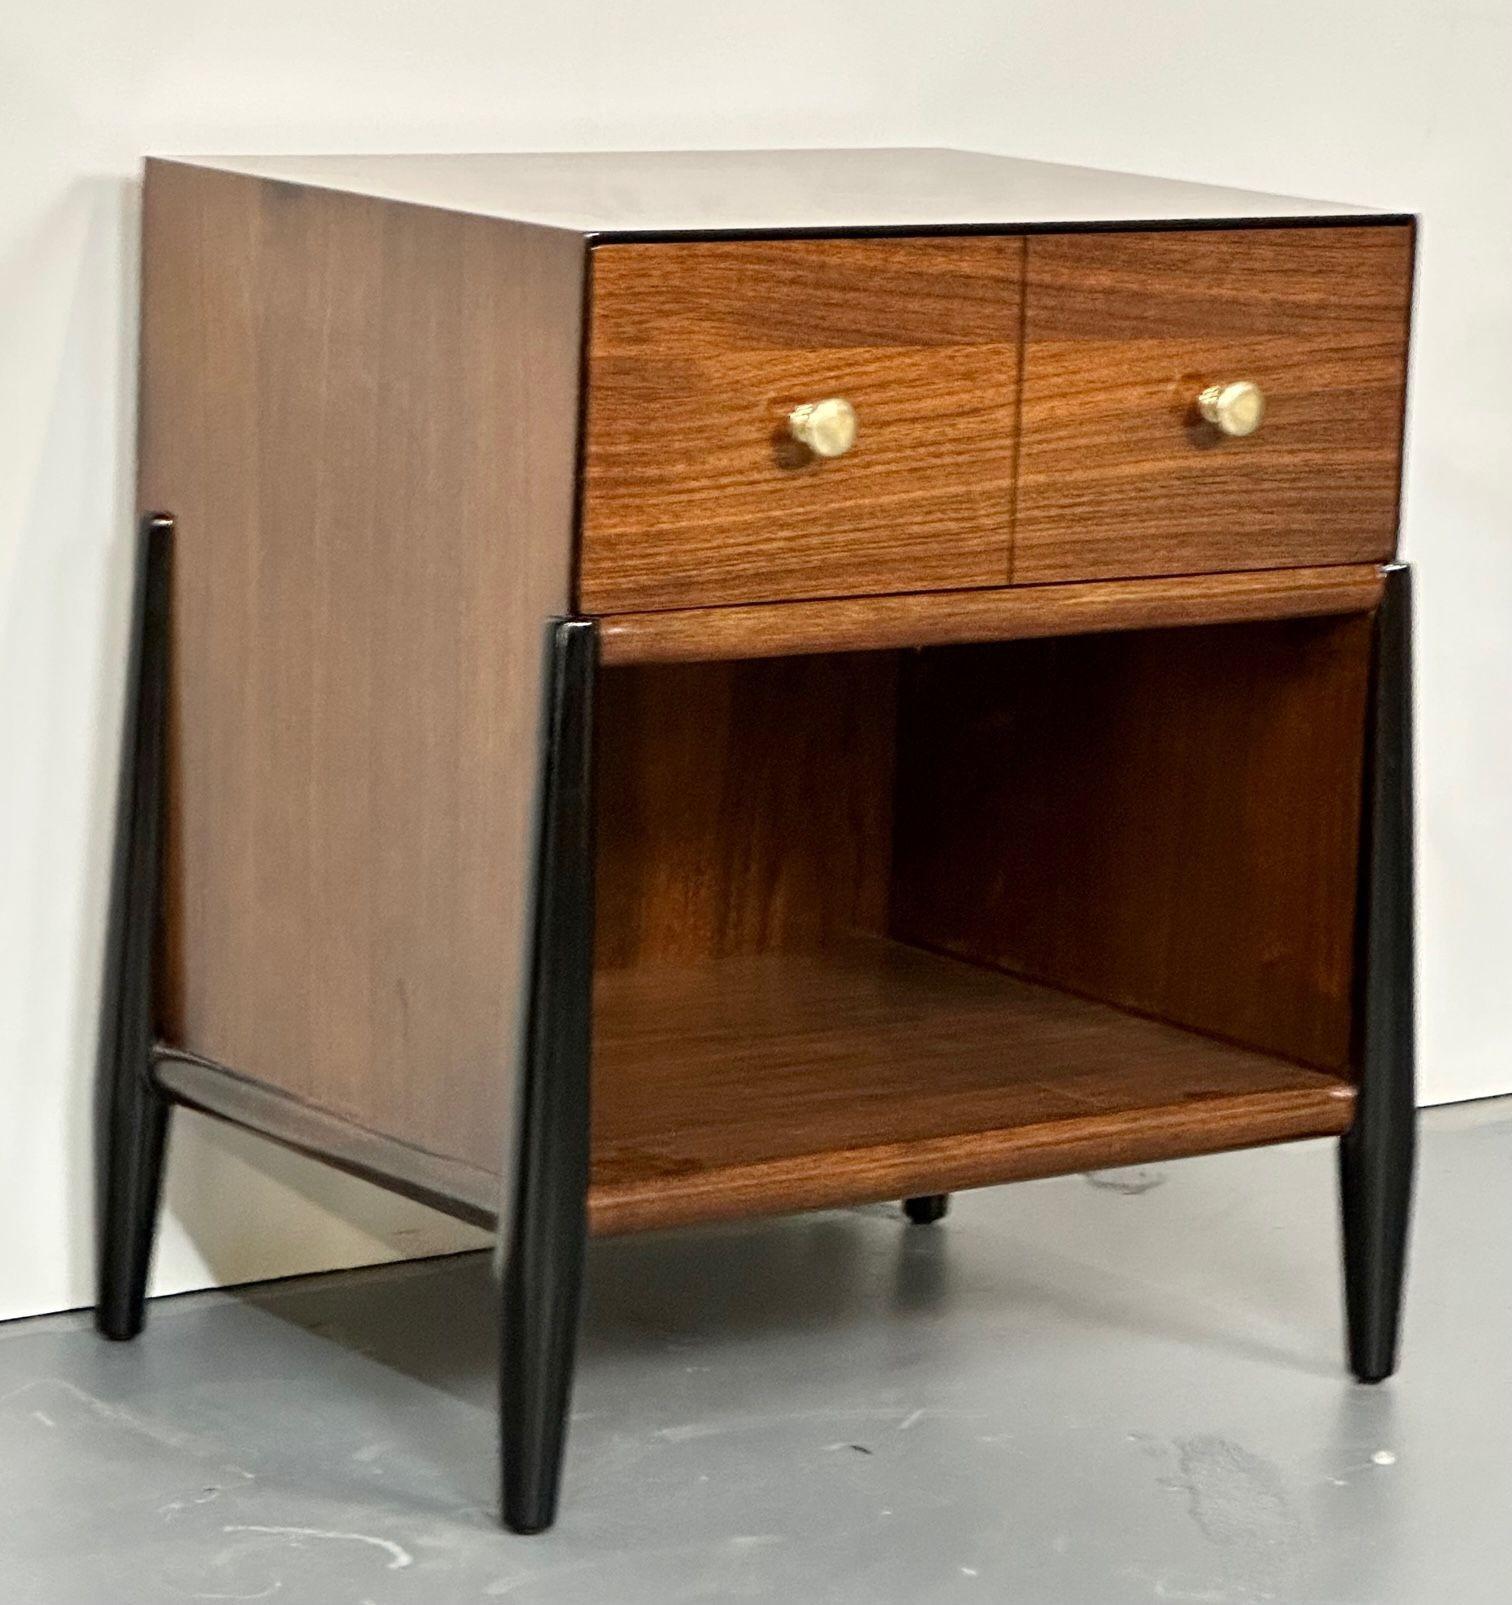 Mid Century Modern Nightstand, End Table, West Michigan Furniture Co. Ebony, Walnut, Metz
One part of a stunning bedroom set. Fully refinished, fine grained walnut with ebonized columns and restored bronze drawer pulls. This lovely, sleek and